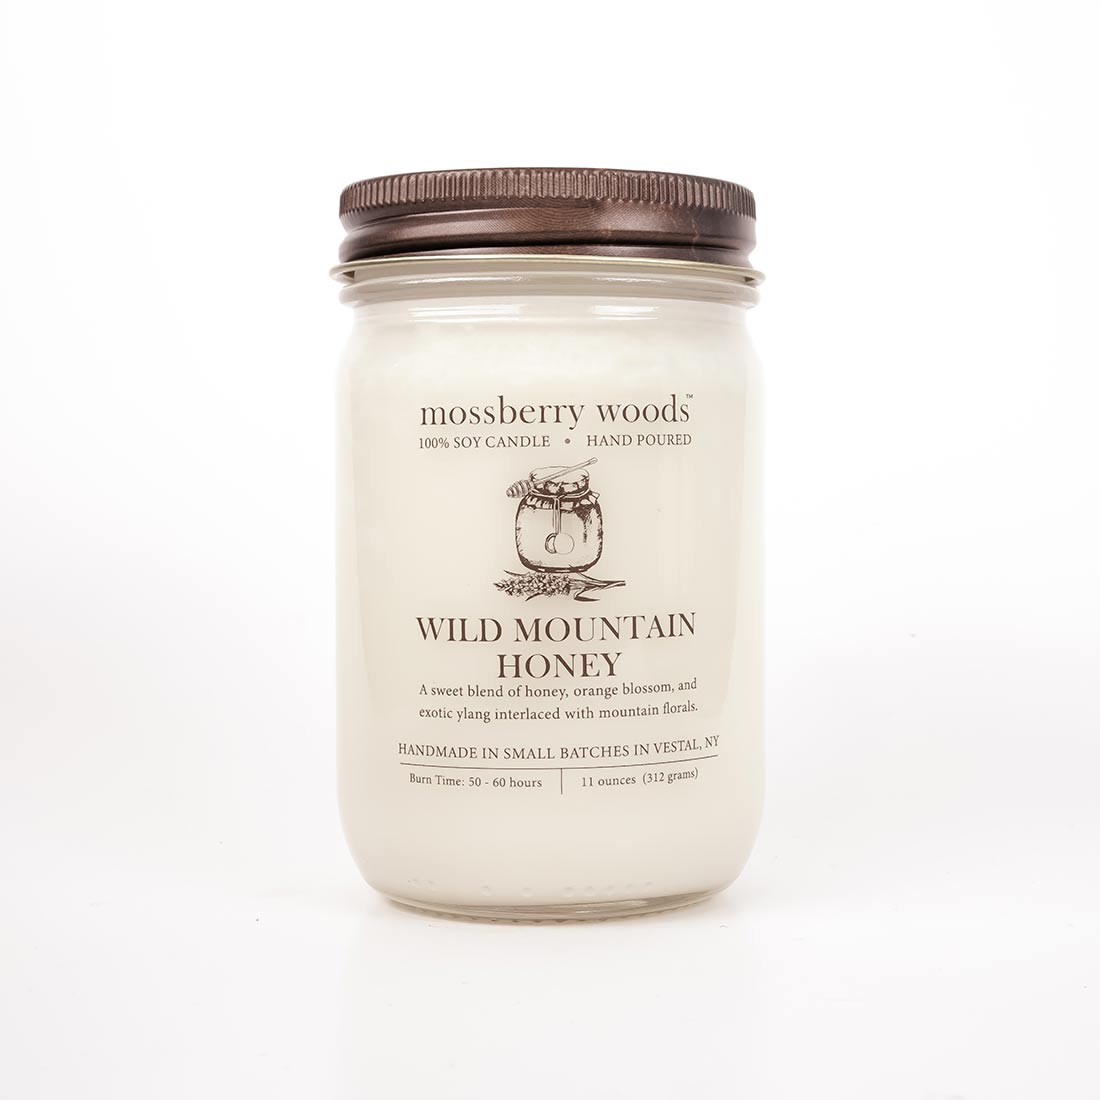 Wild Mountain Honey Country Cottage Candle with a rustic brown metal lid